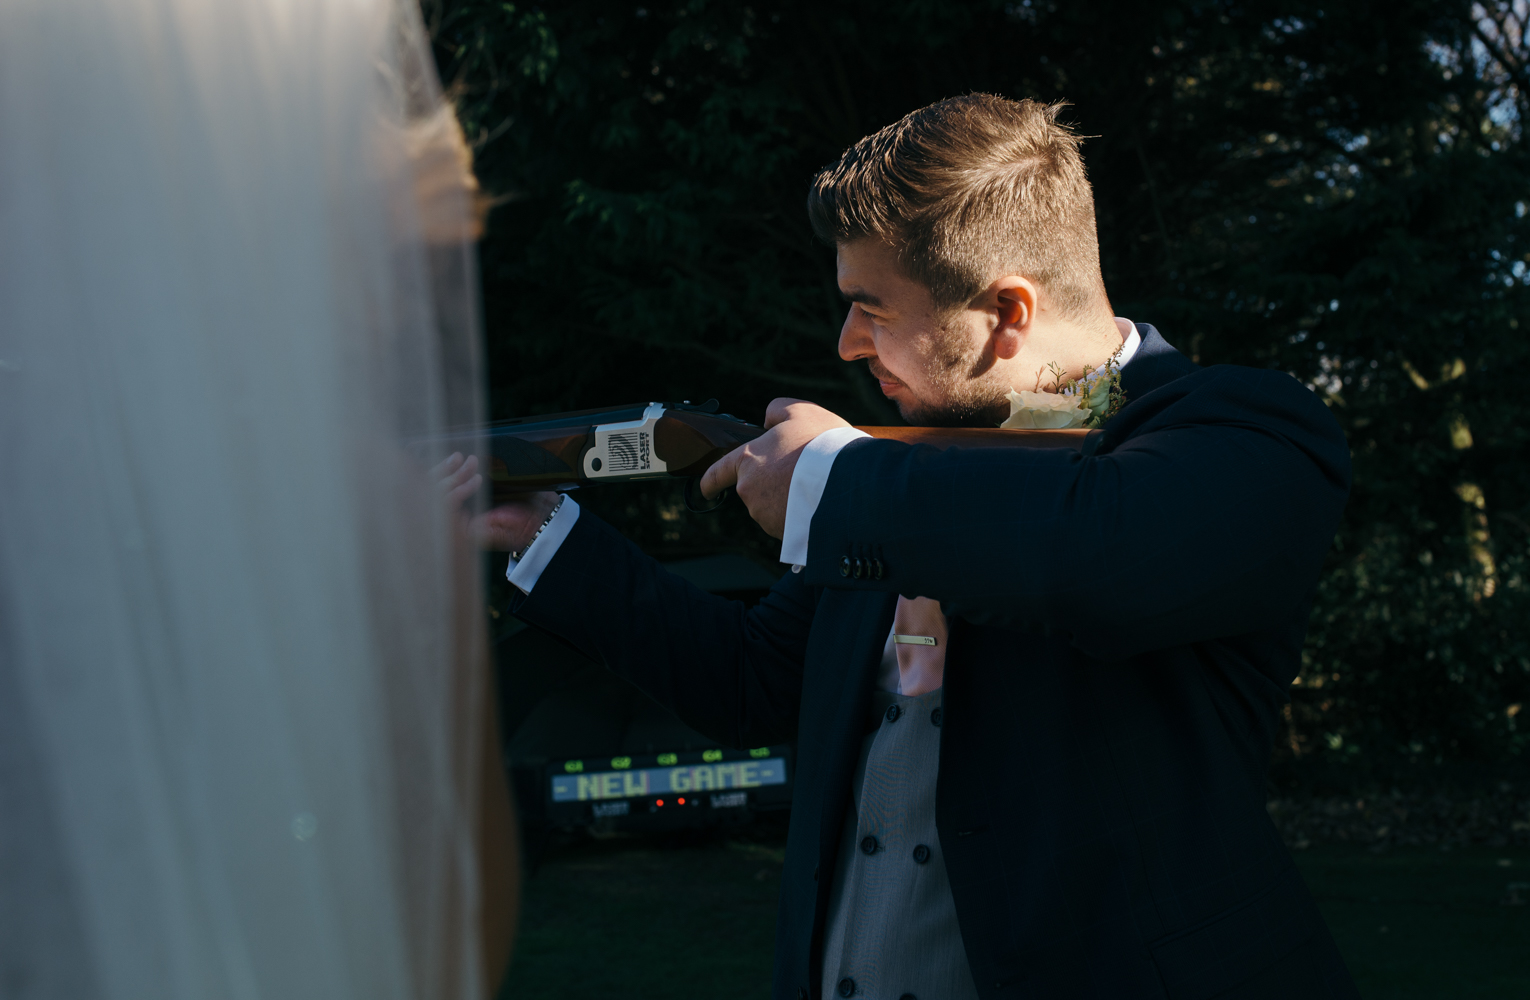 The groom trying his hand at laser clay pigeon shooting